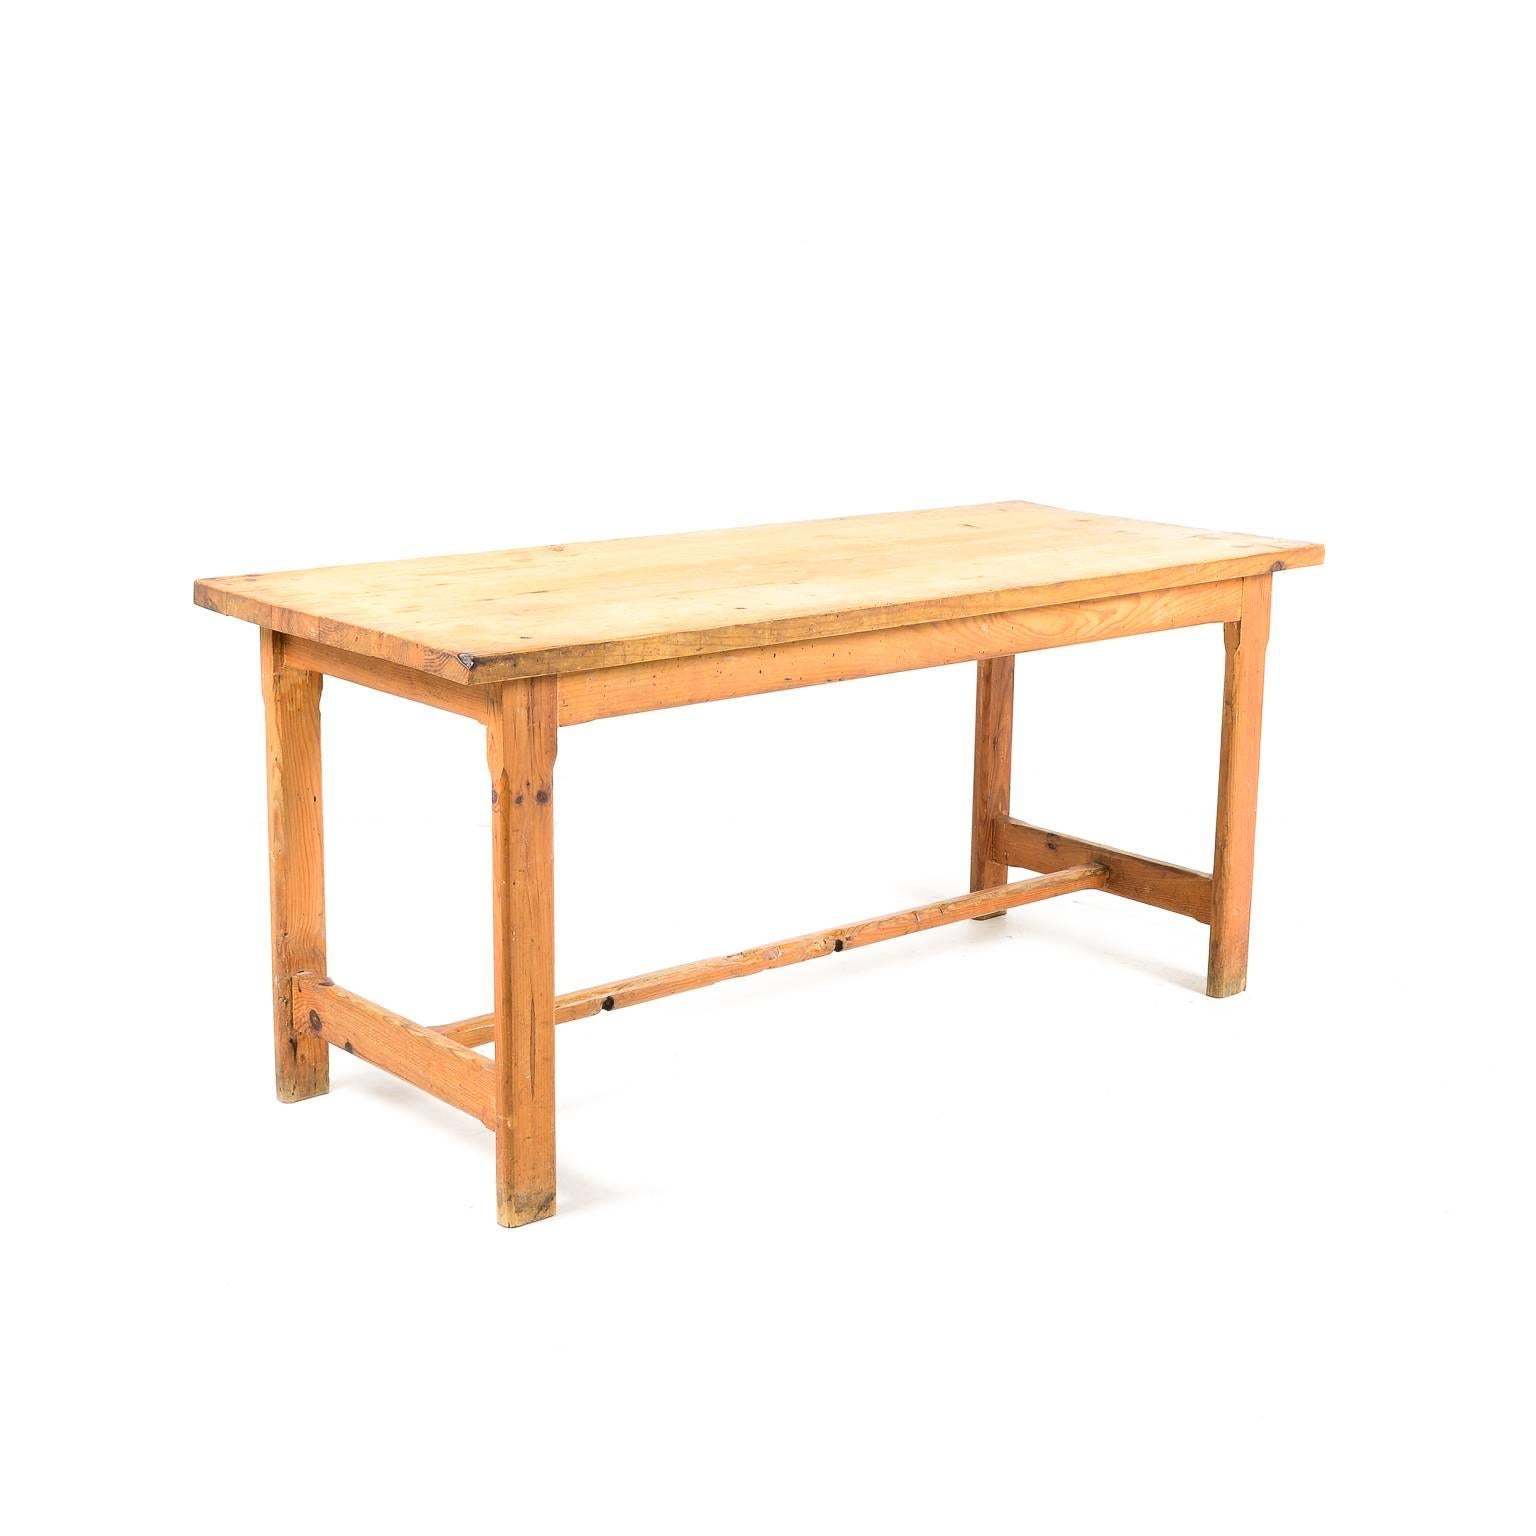 Antique early 20th century French solid pine trestle table. Suitable for everyday use.



